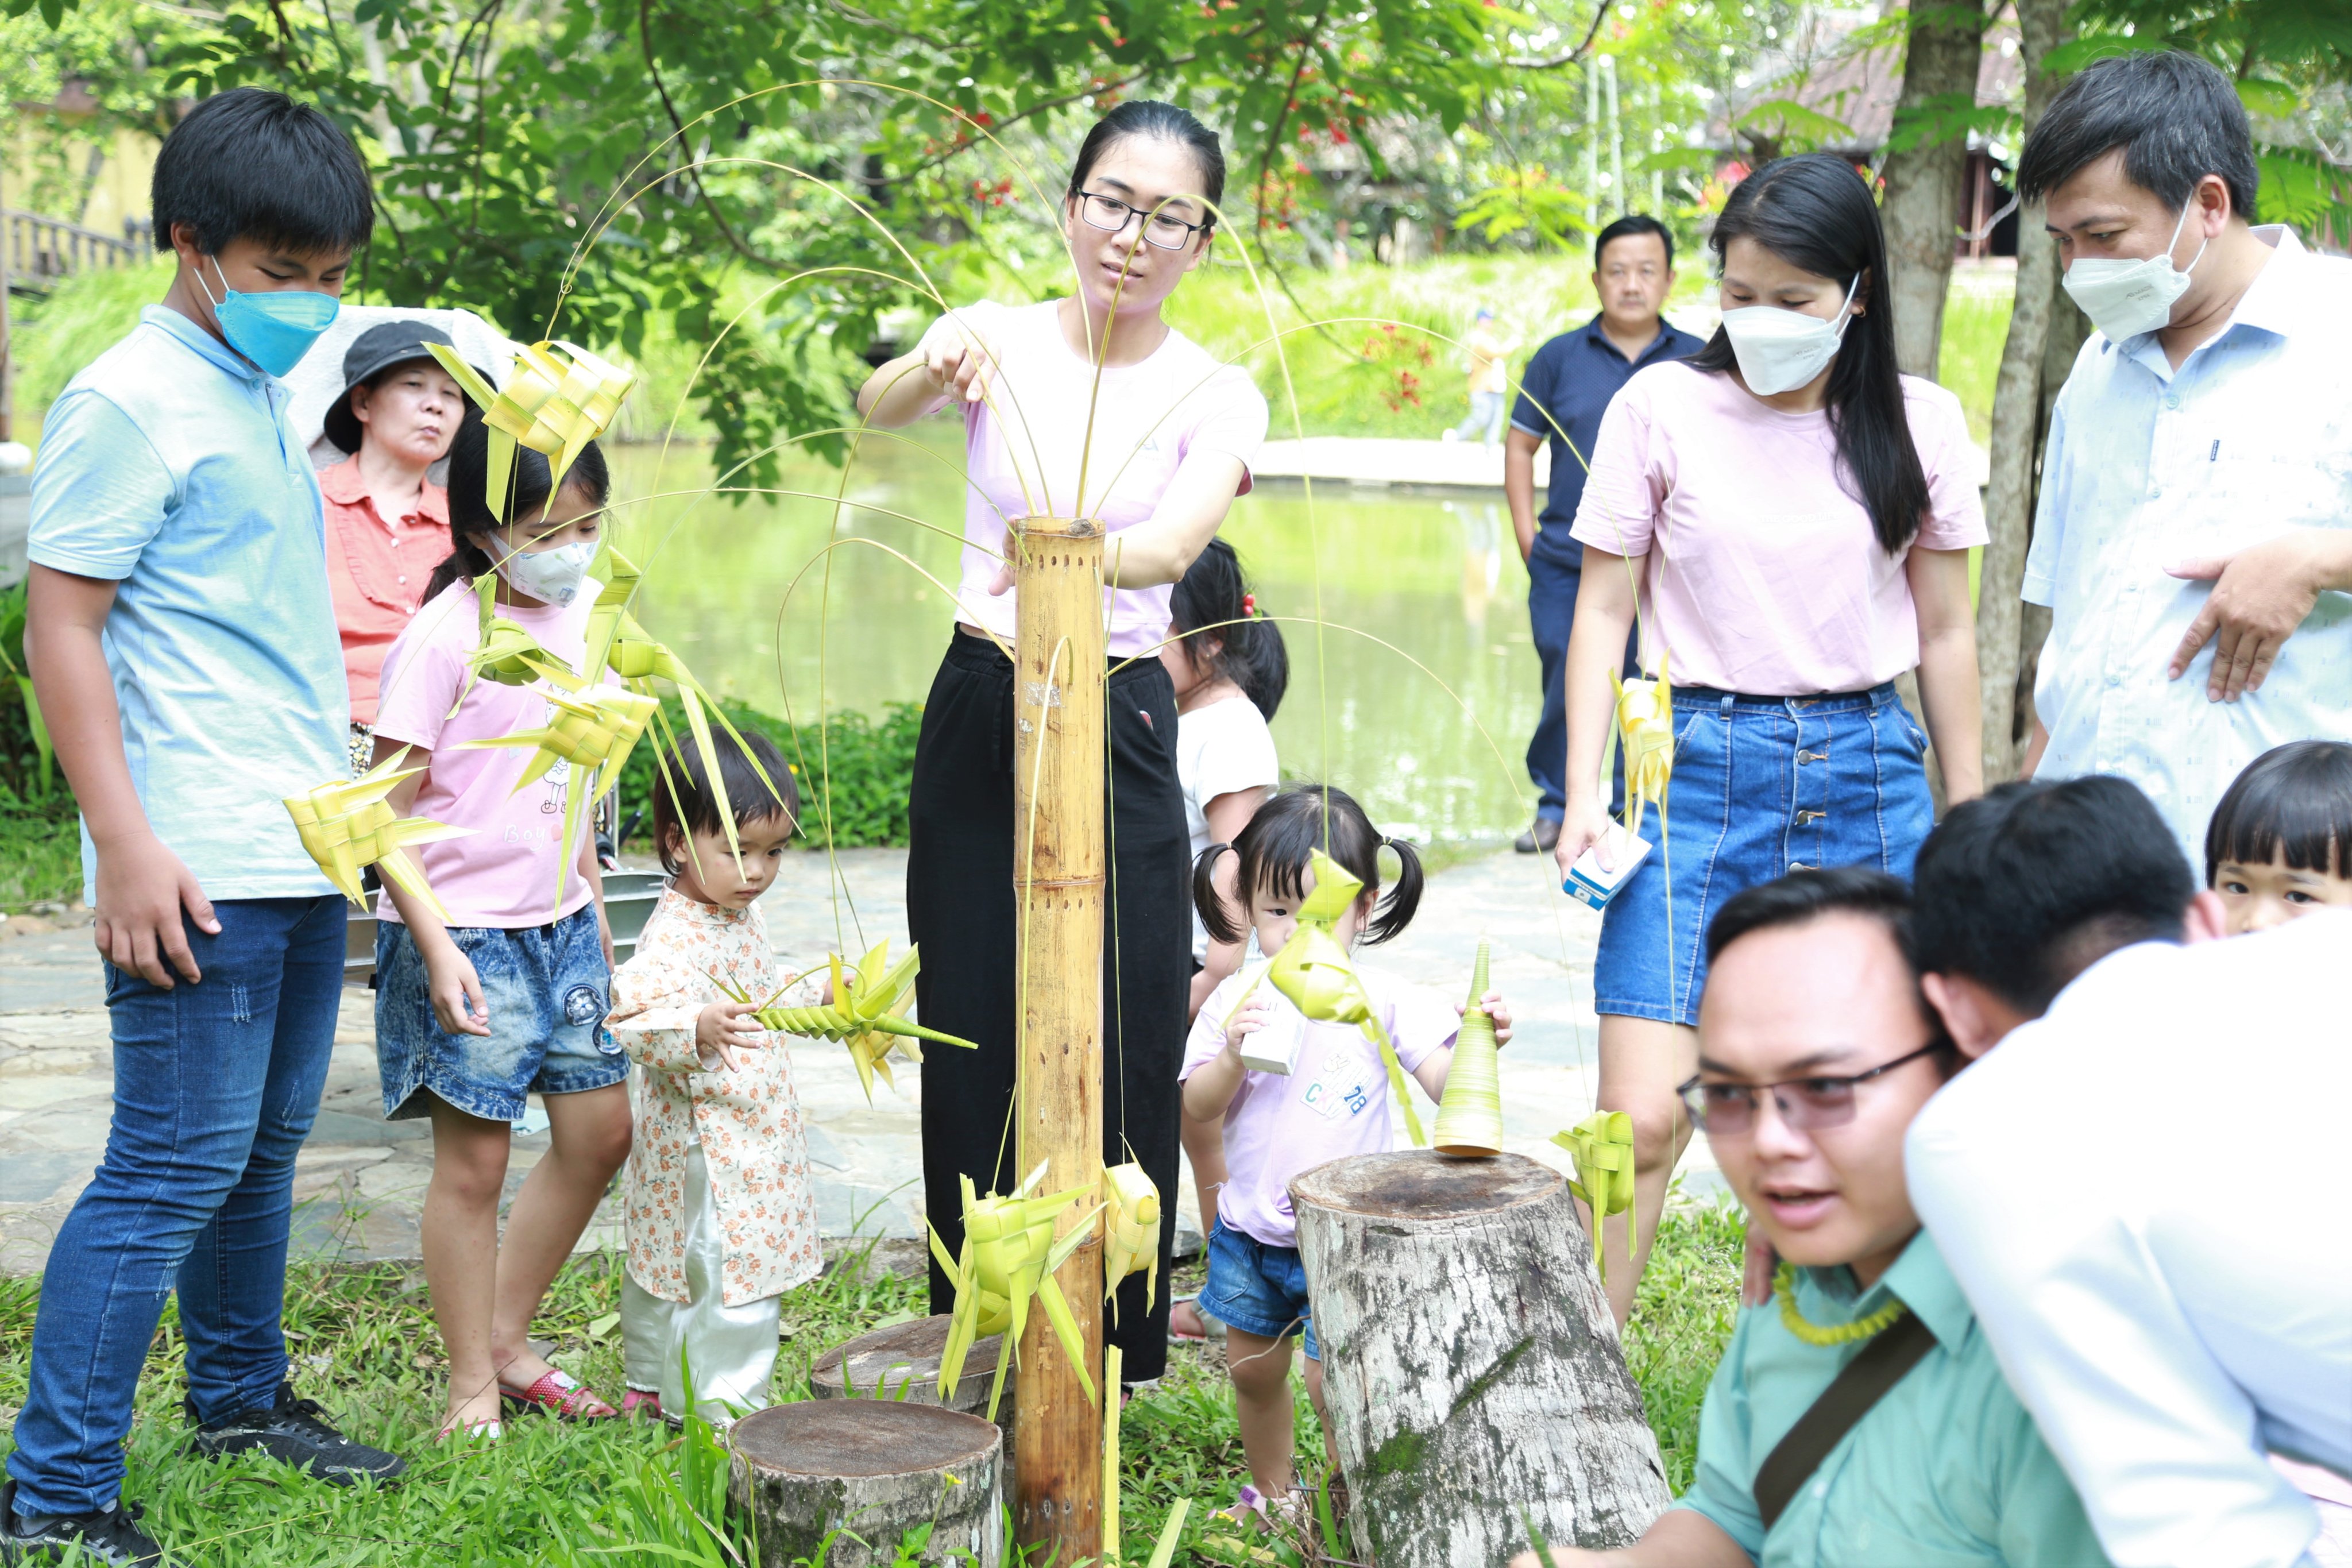 Participants try making toys from leaves at the ‘Leaves Festival’ at Ao Dai Museum in Thu Duc City under Ho Chi Minh City, May 29, 2022. Photo: Handout via Tuoi Tre